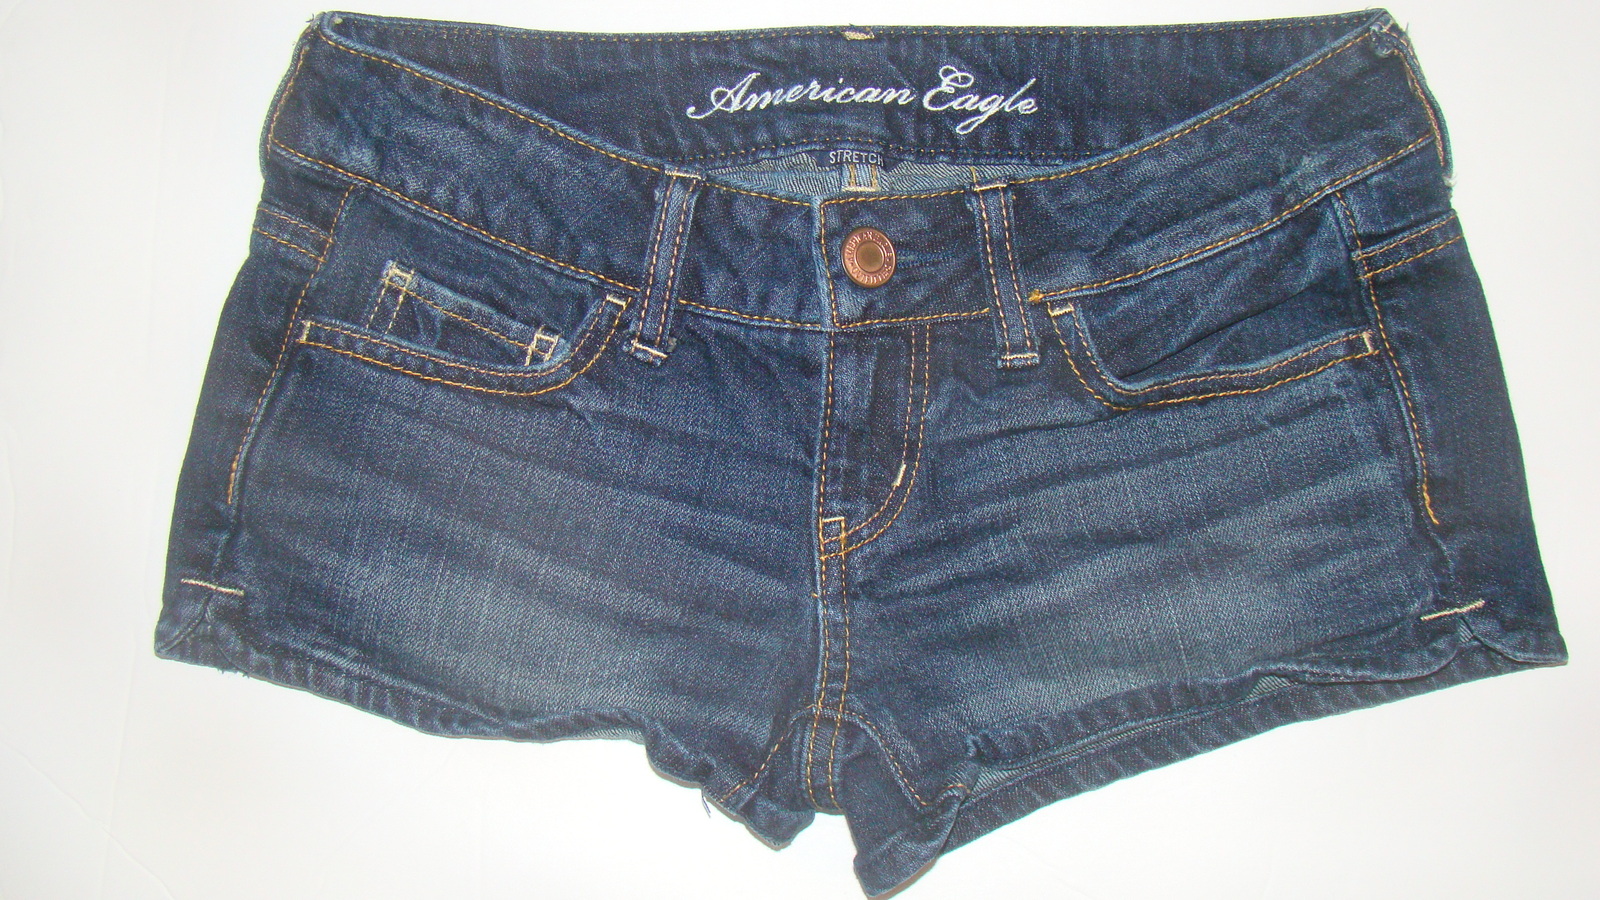 Primary image for American Eagle - Size 0 - Woman's Denim Shorts